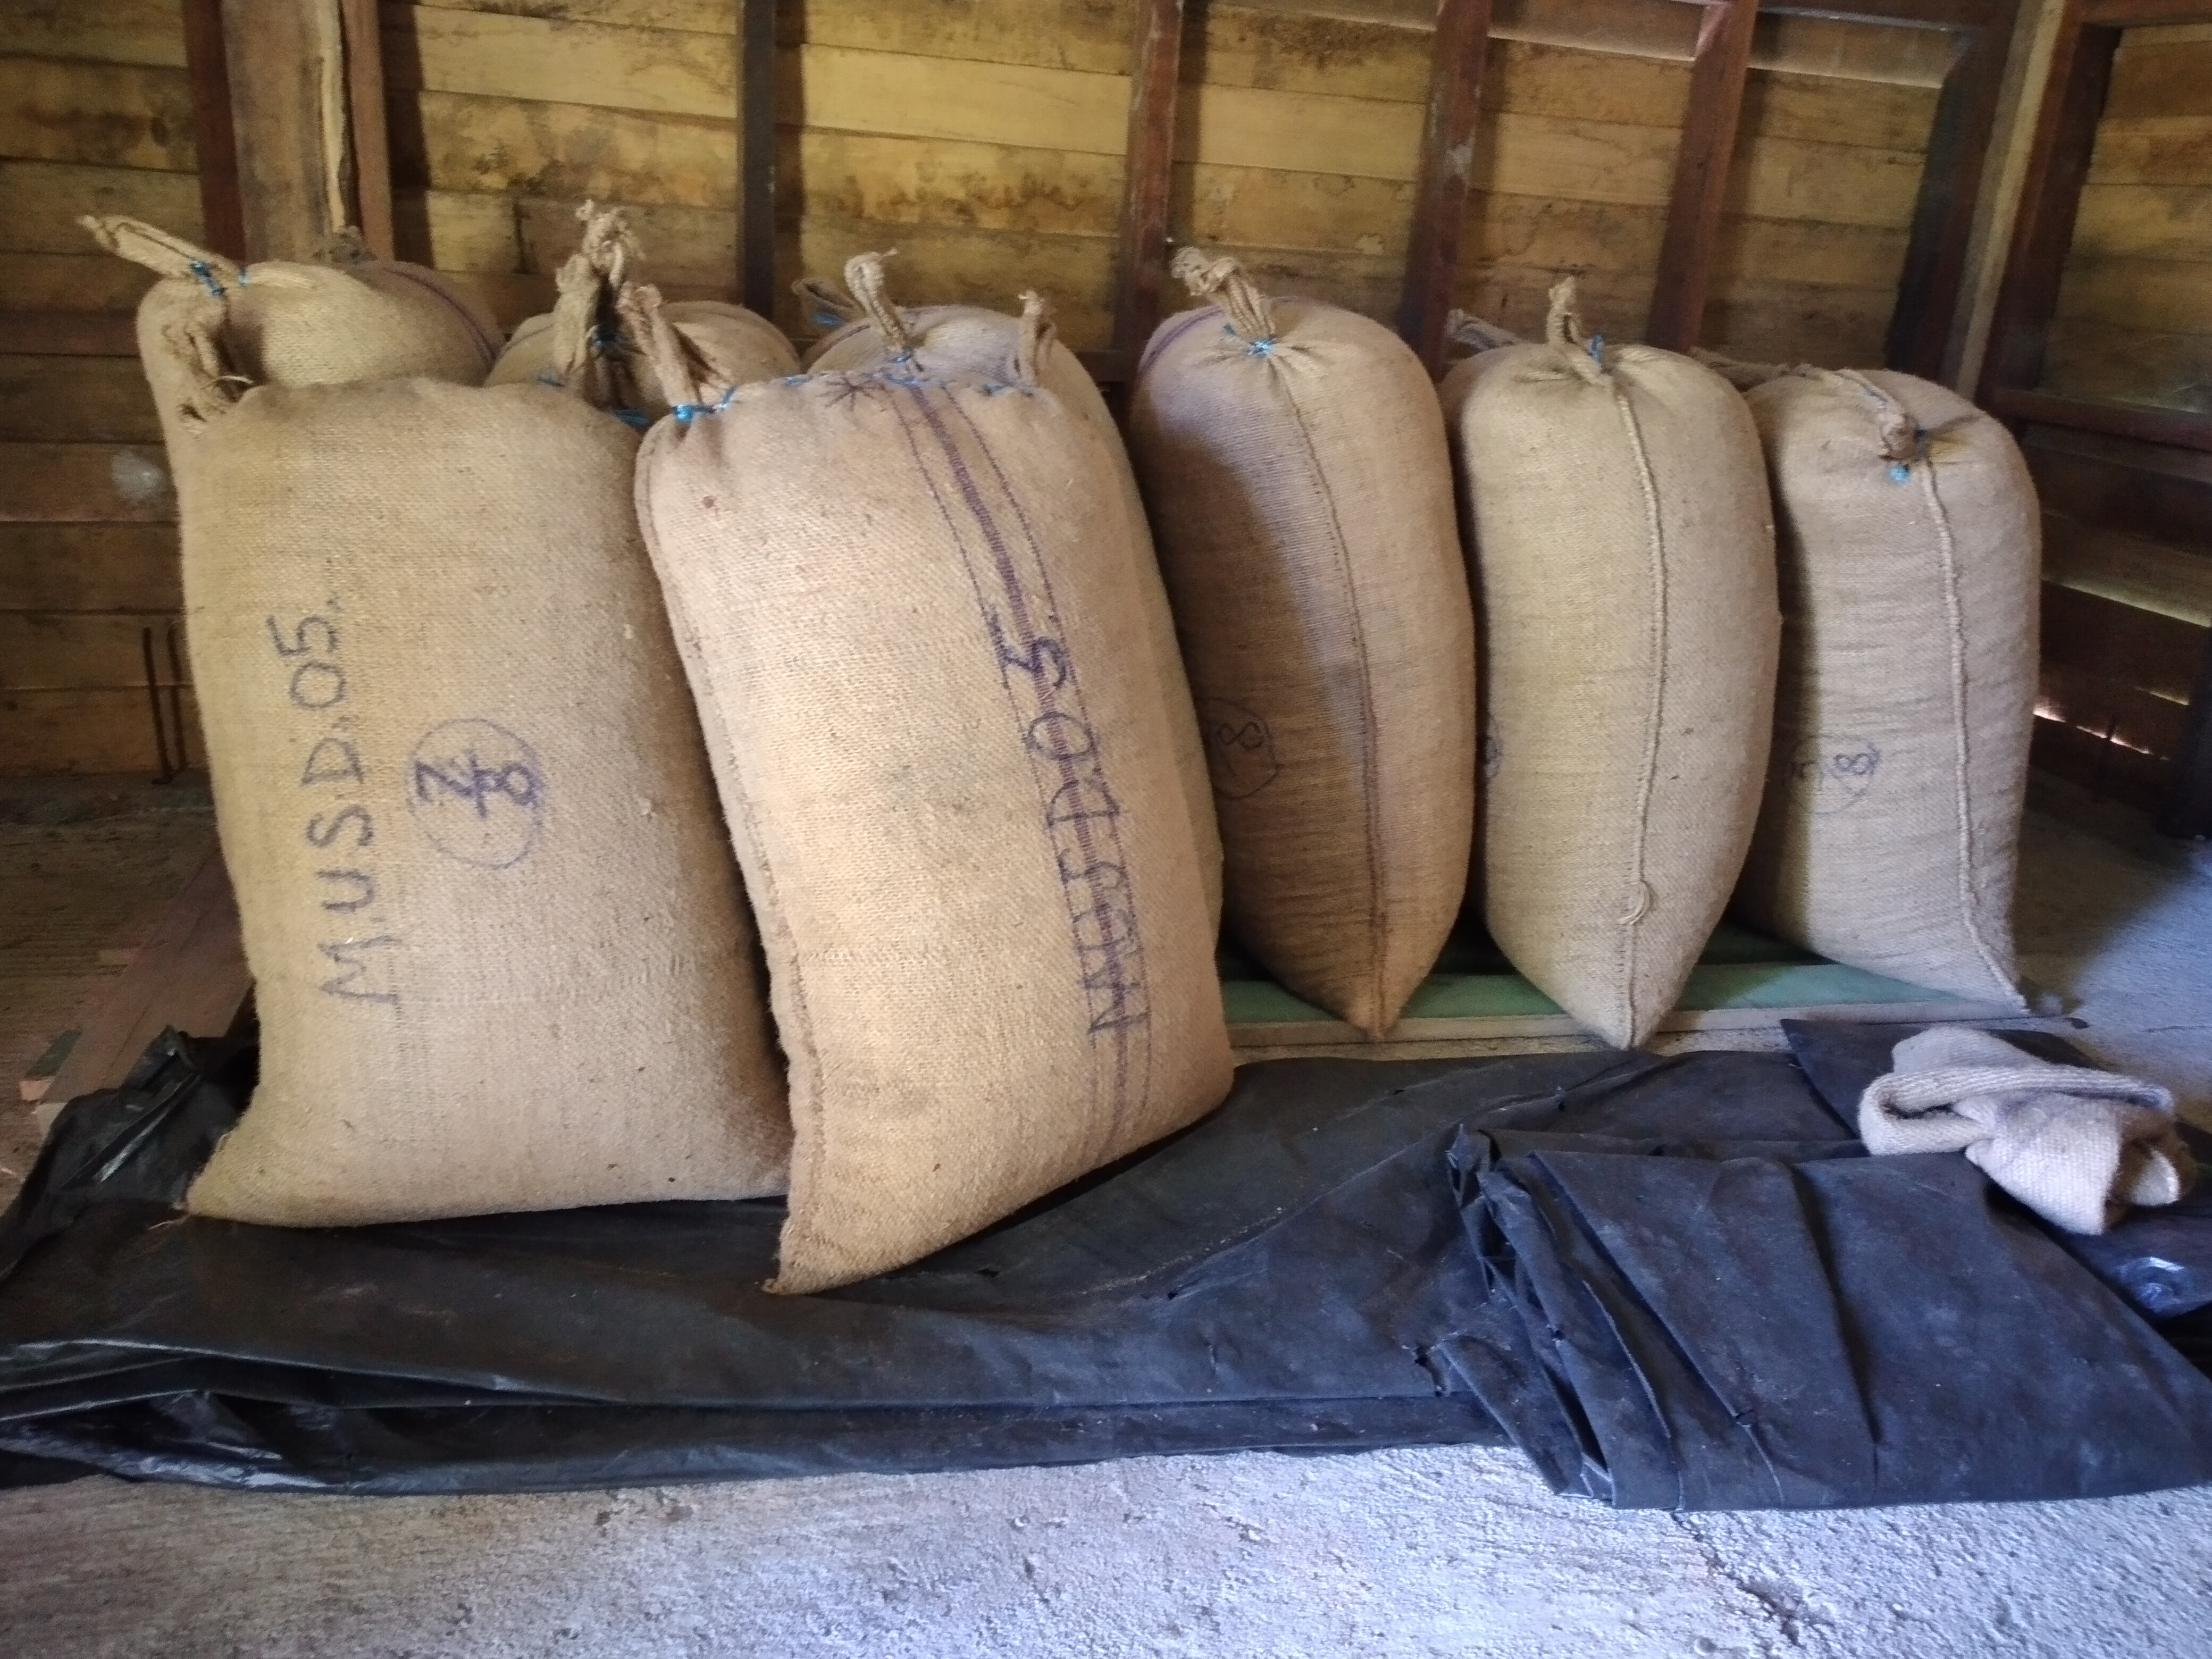 Bags of cocoa awaiting shipment to buyer